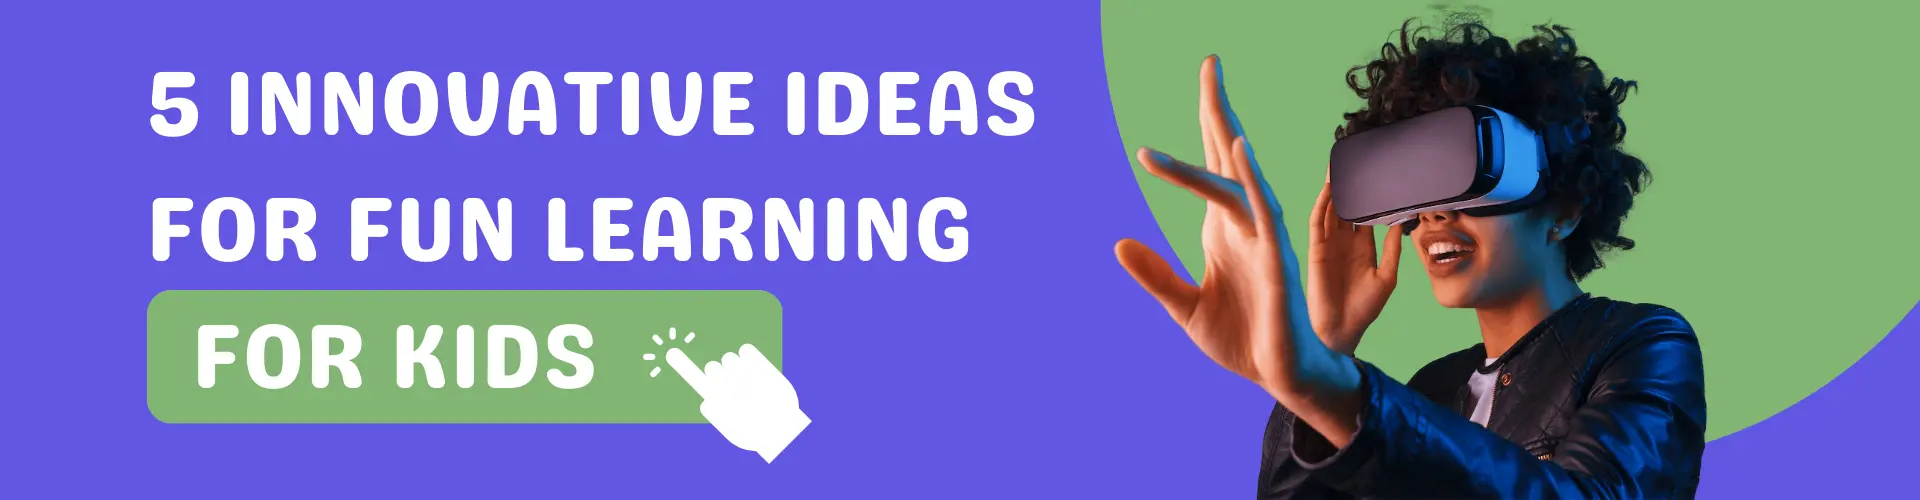 innovative ideas for fun learning